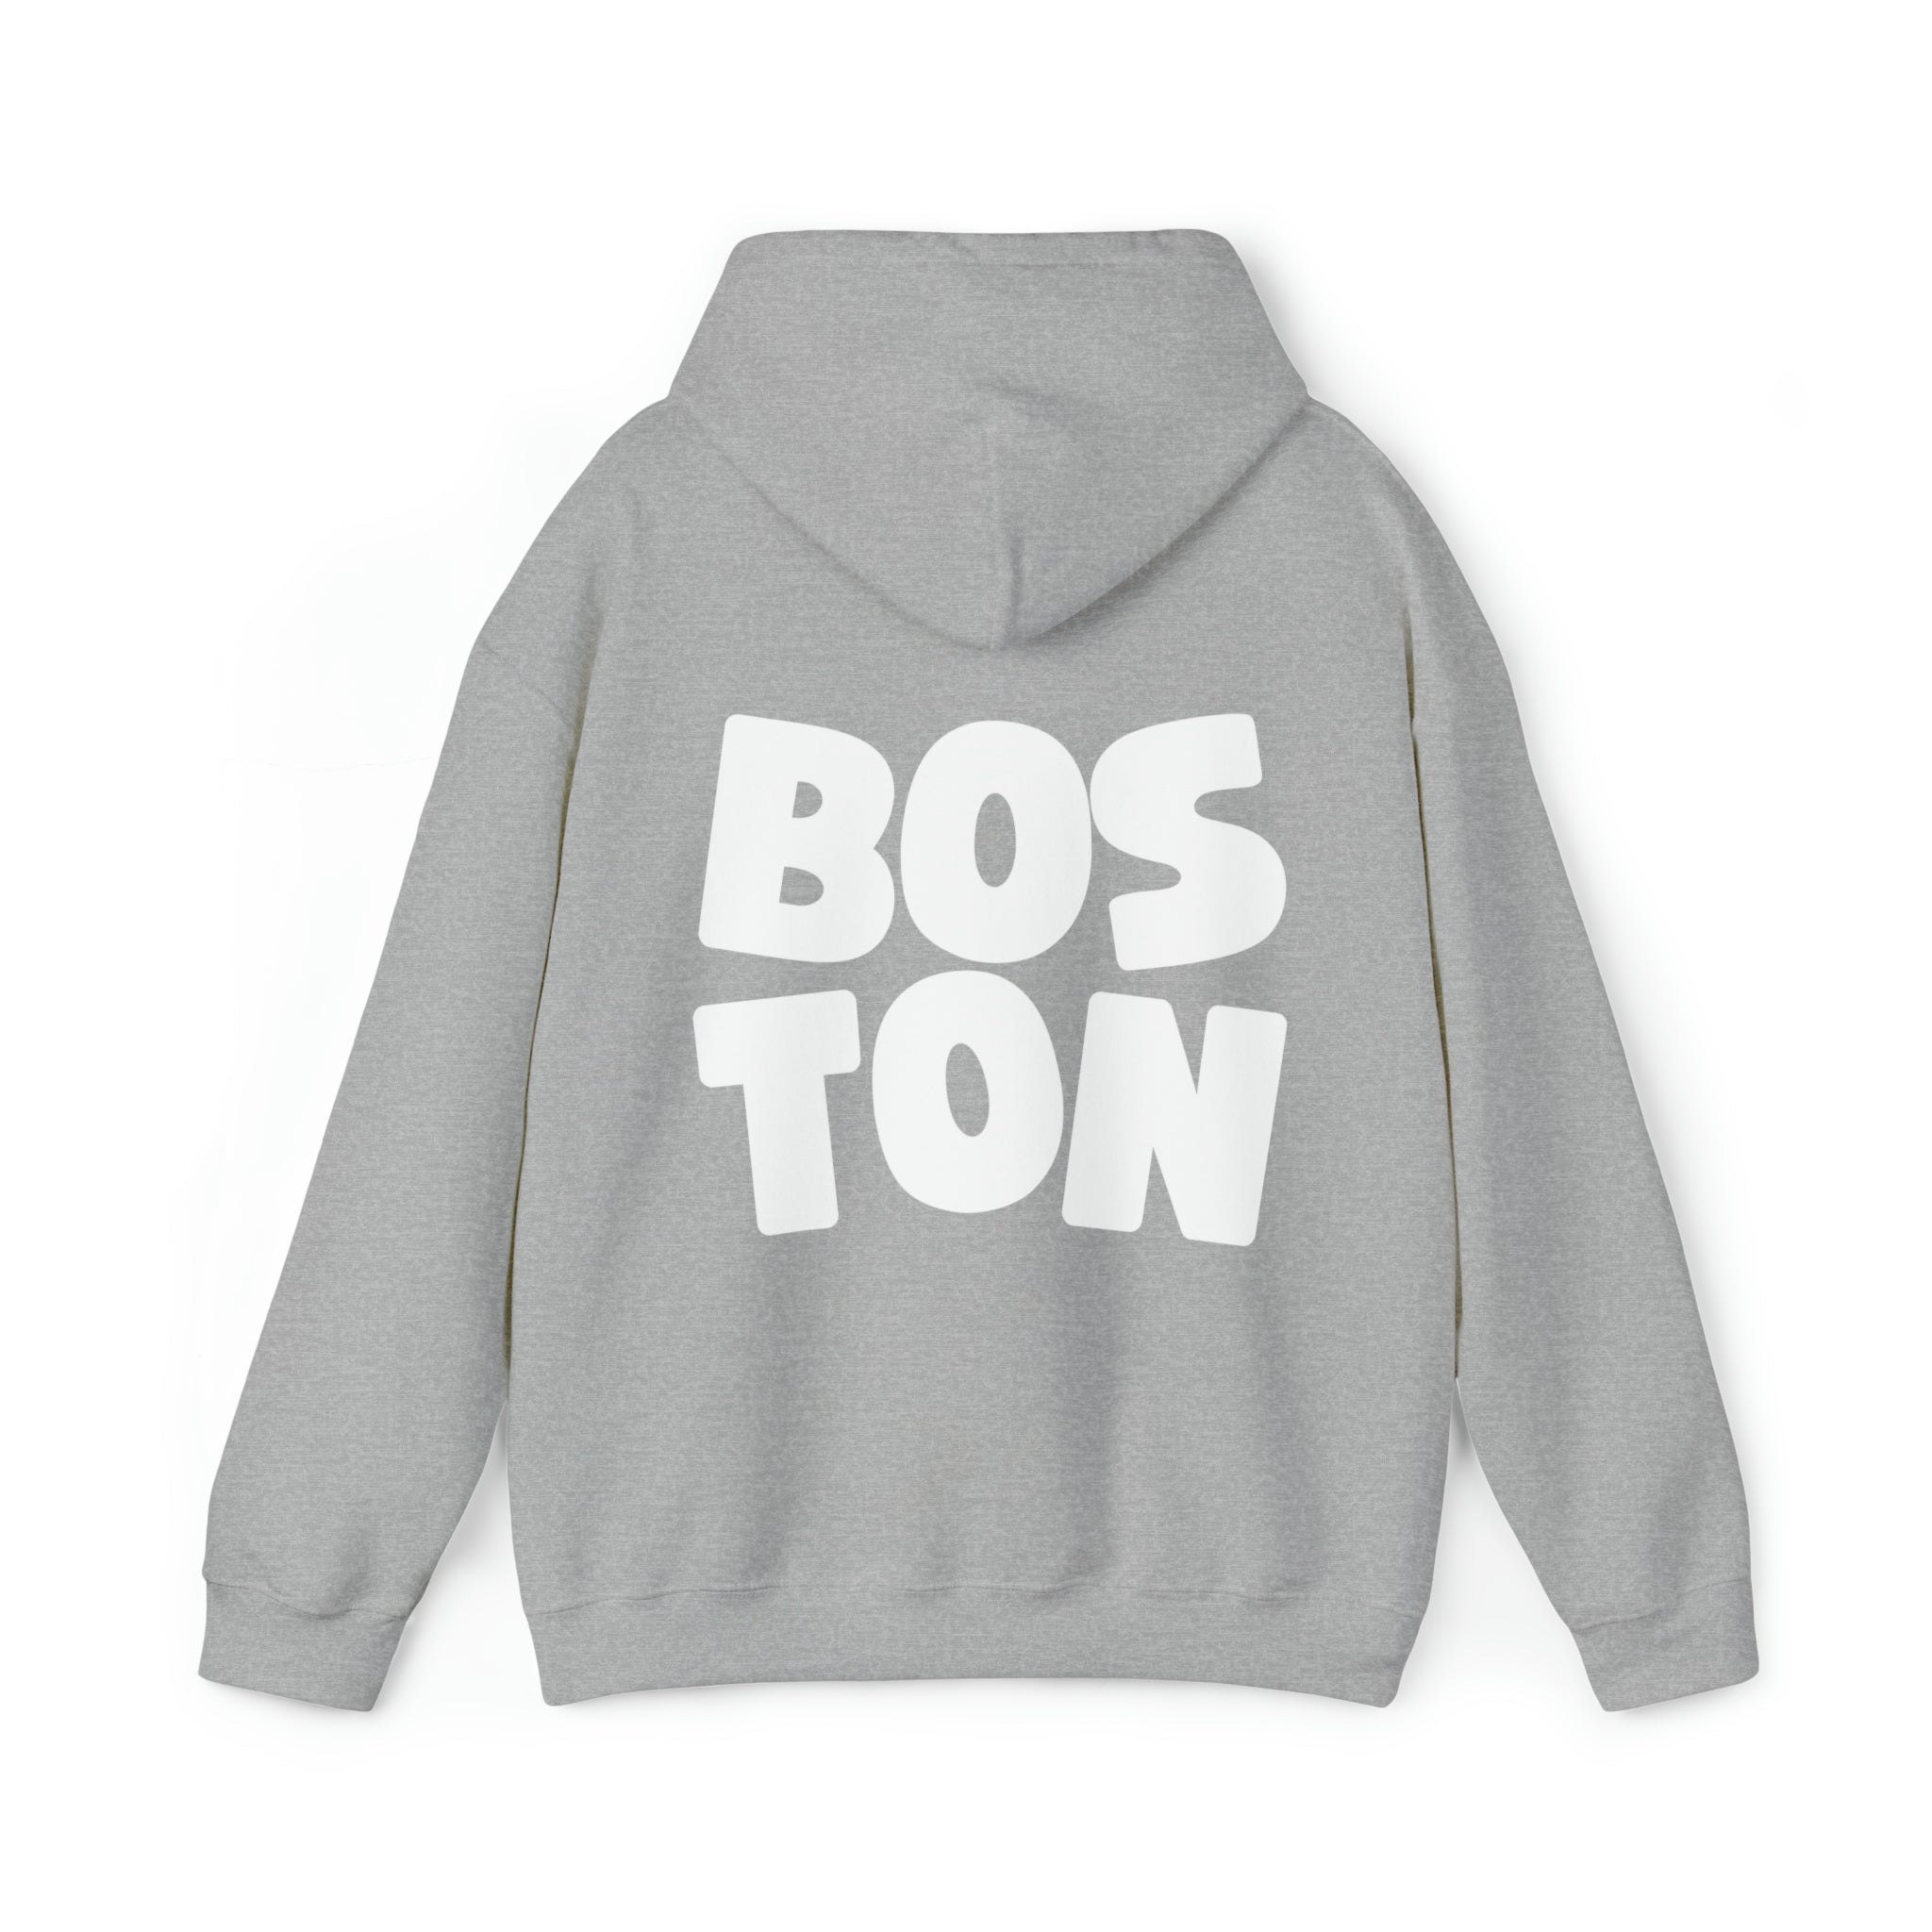 Zoomed-in image showing the high-quality print of the Boston on GS Print Shoppe's sweatshirt.